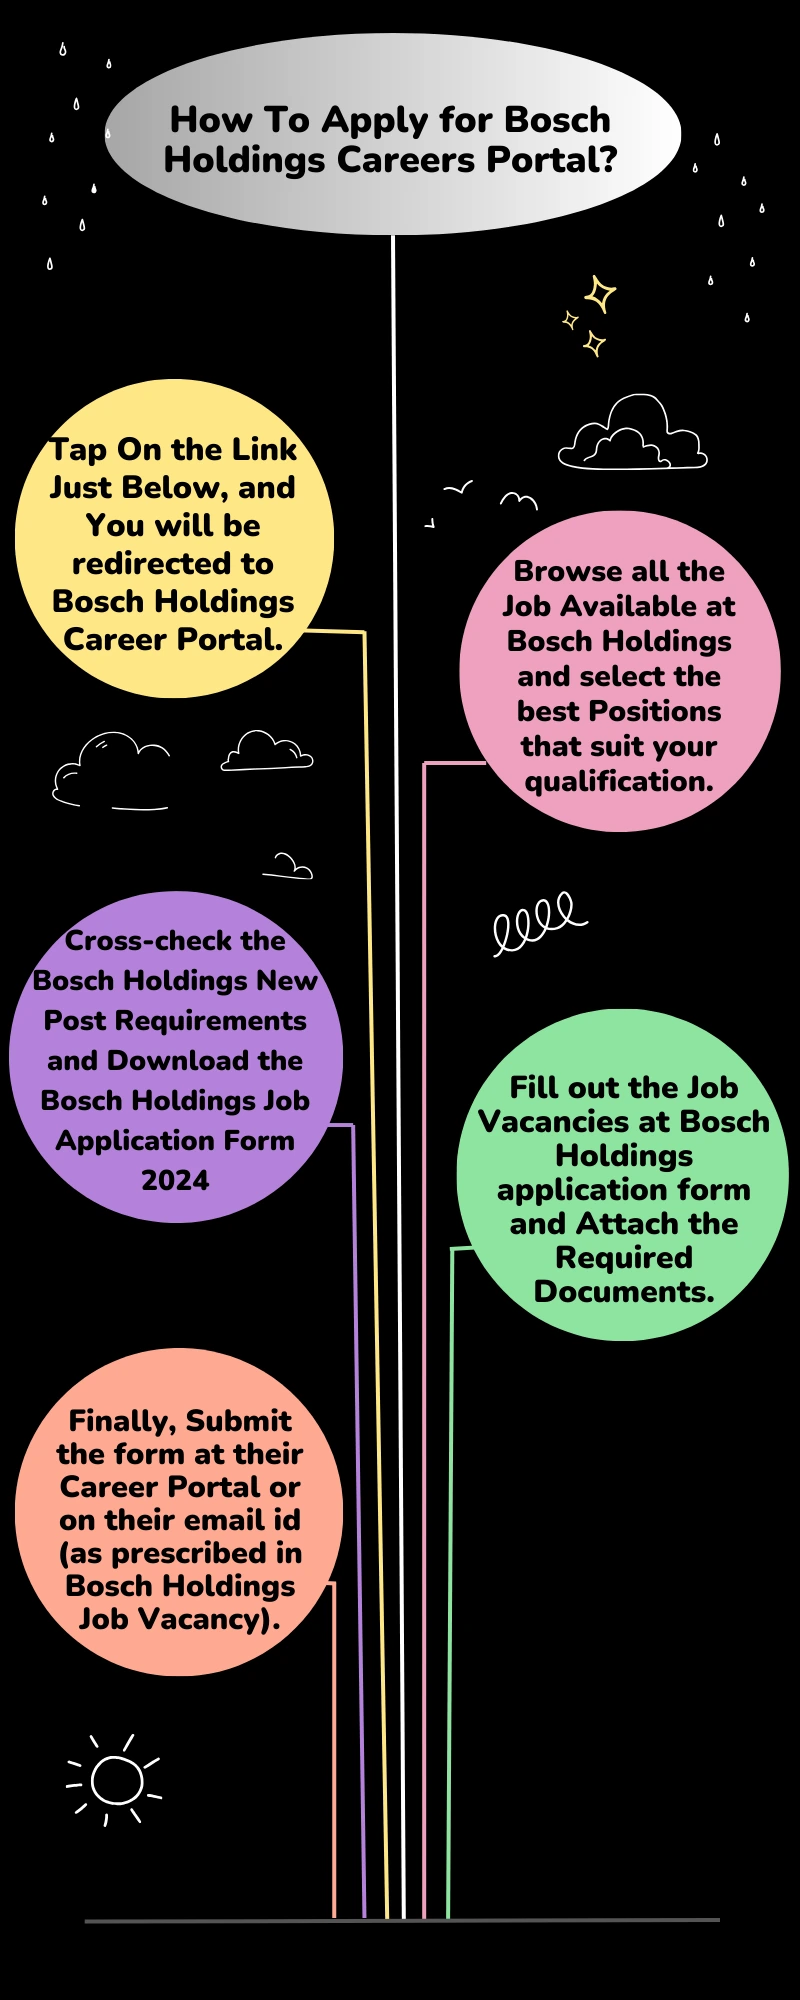 How To Apply for Bosch Holdings Careers Portal